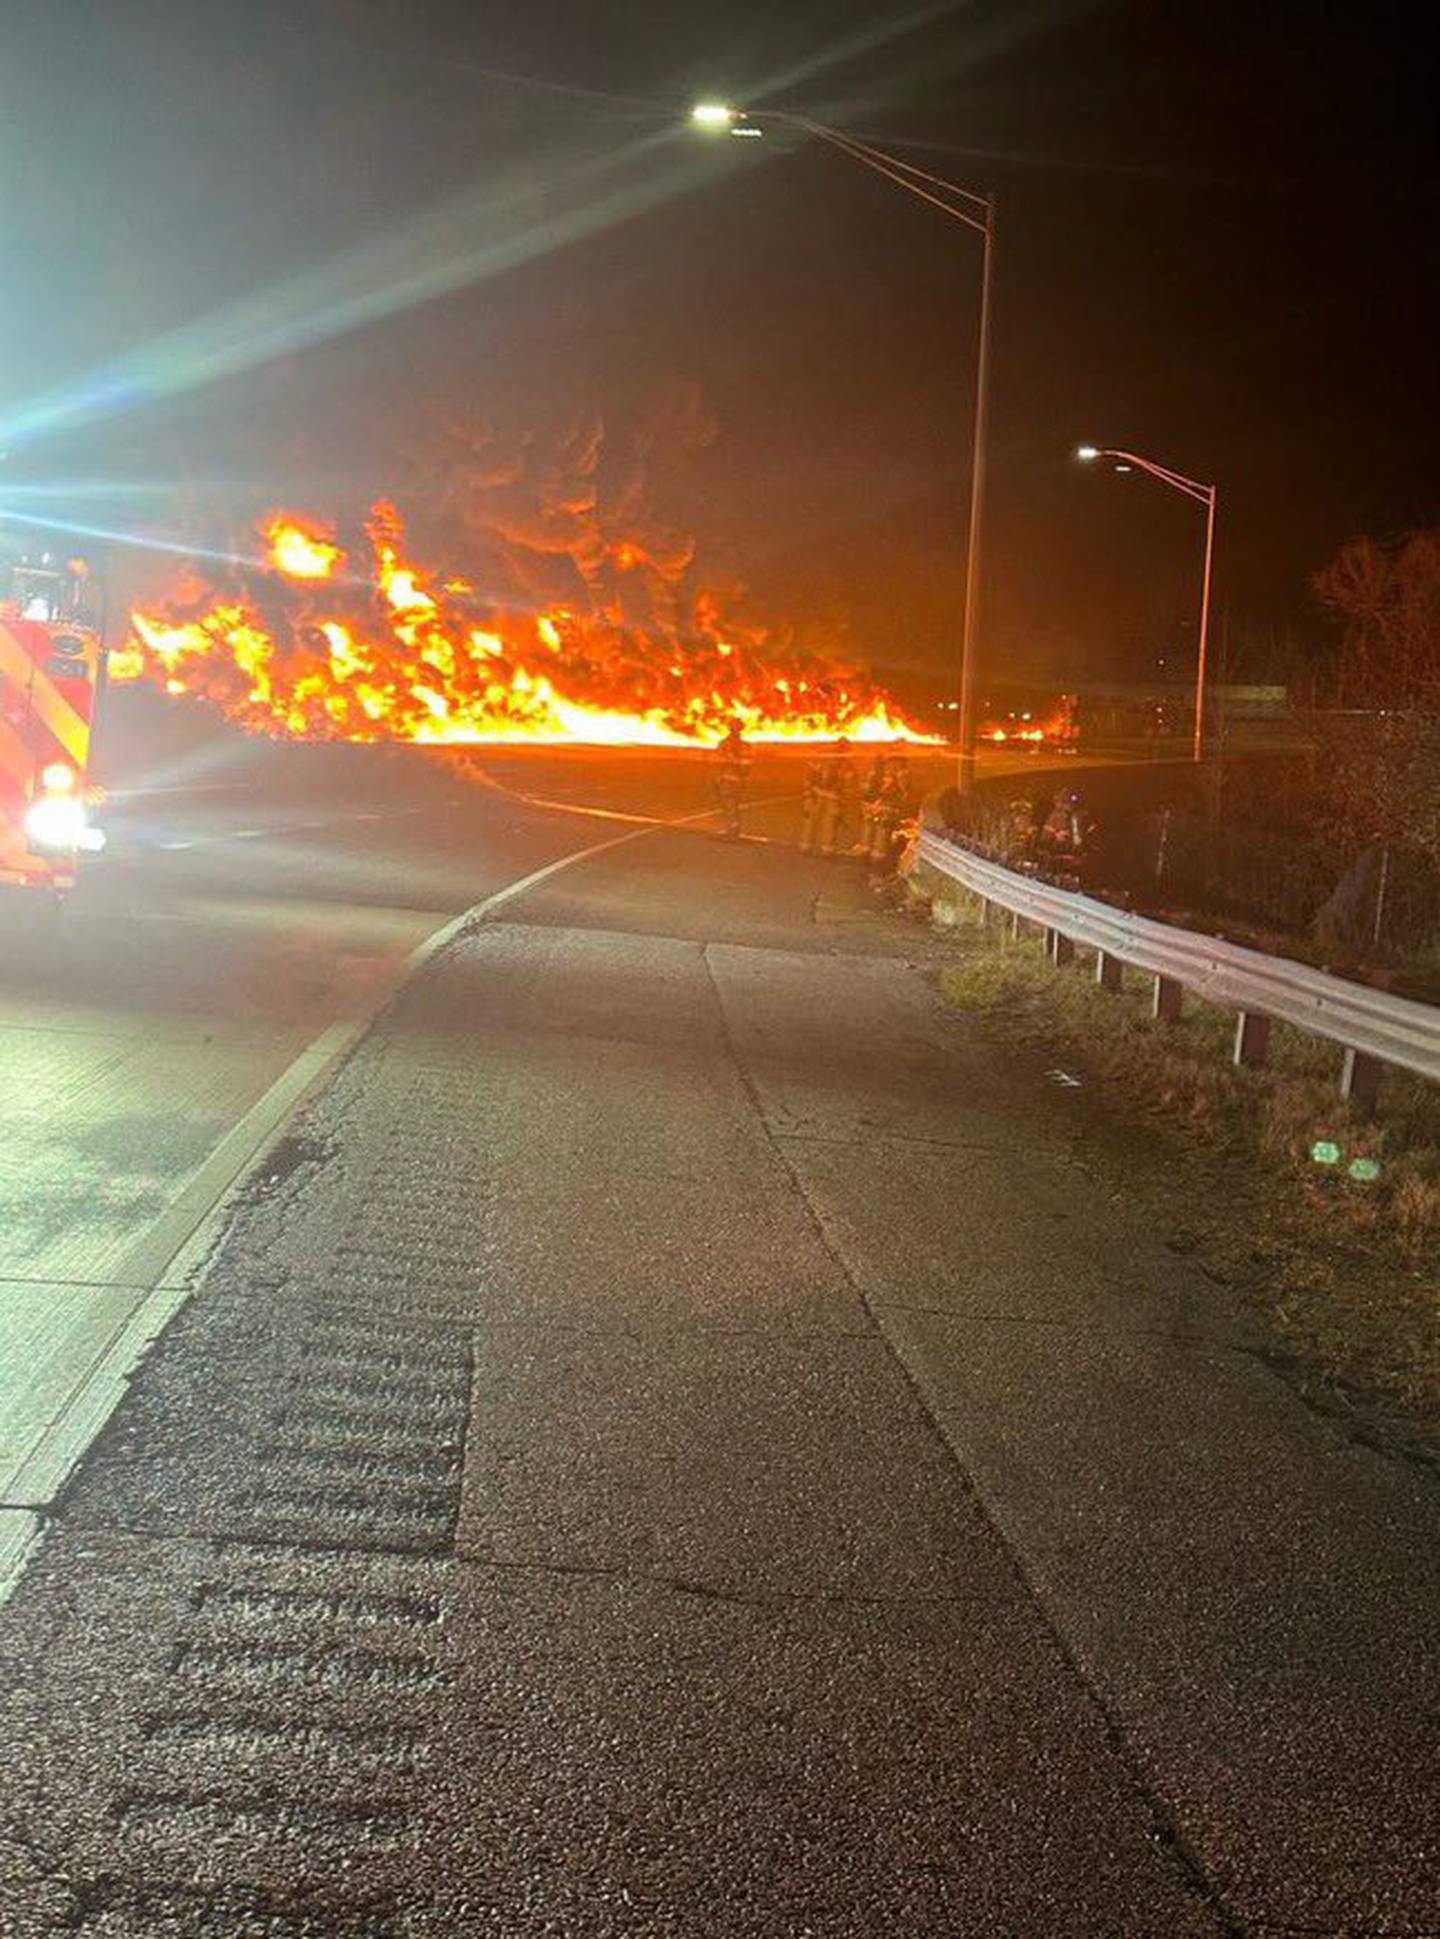 Scene of fiery tanker crash that has shut down both directions of the I-795 expressway in Pikesville.